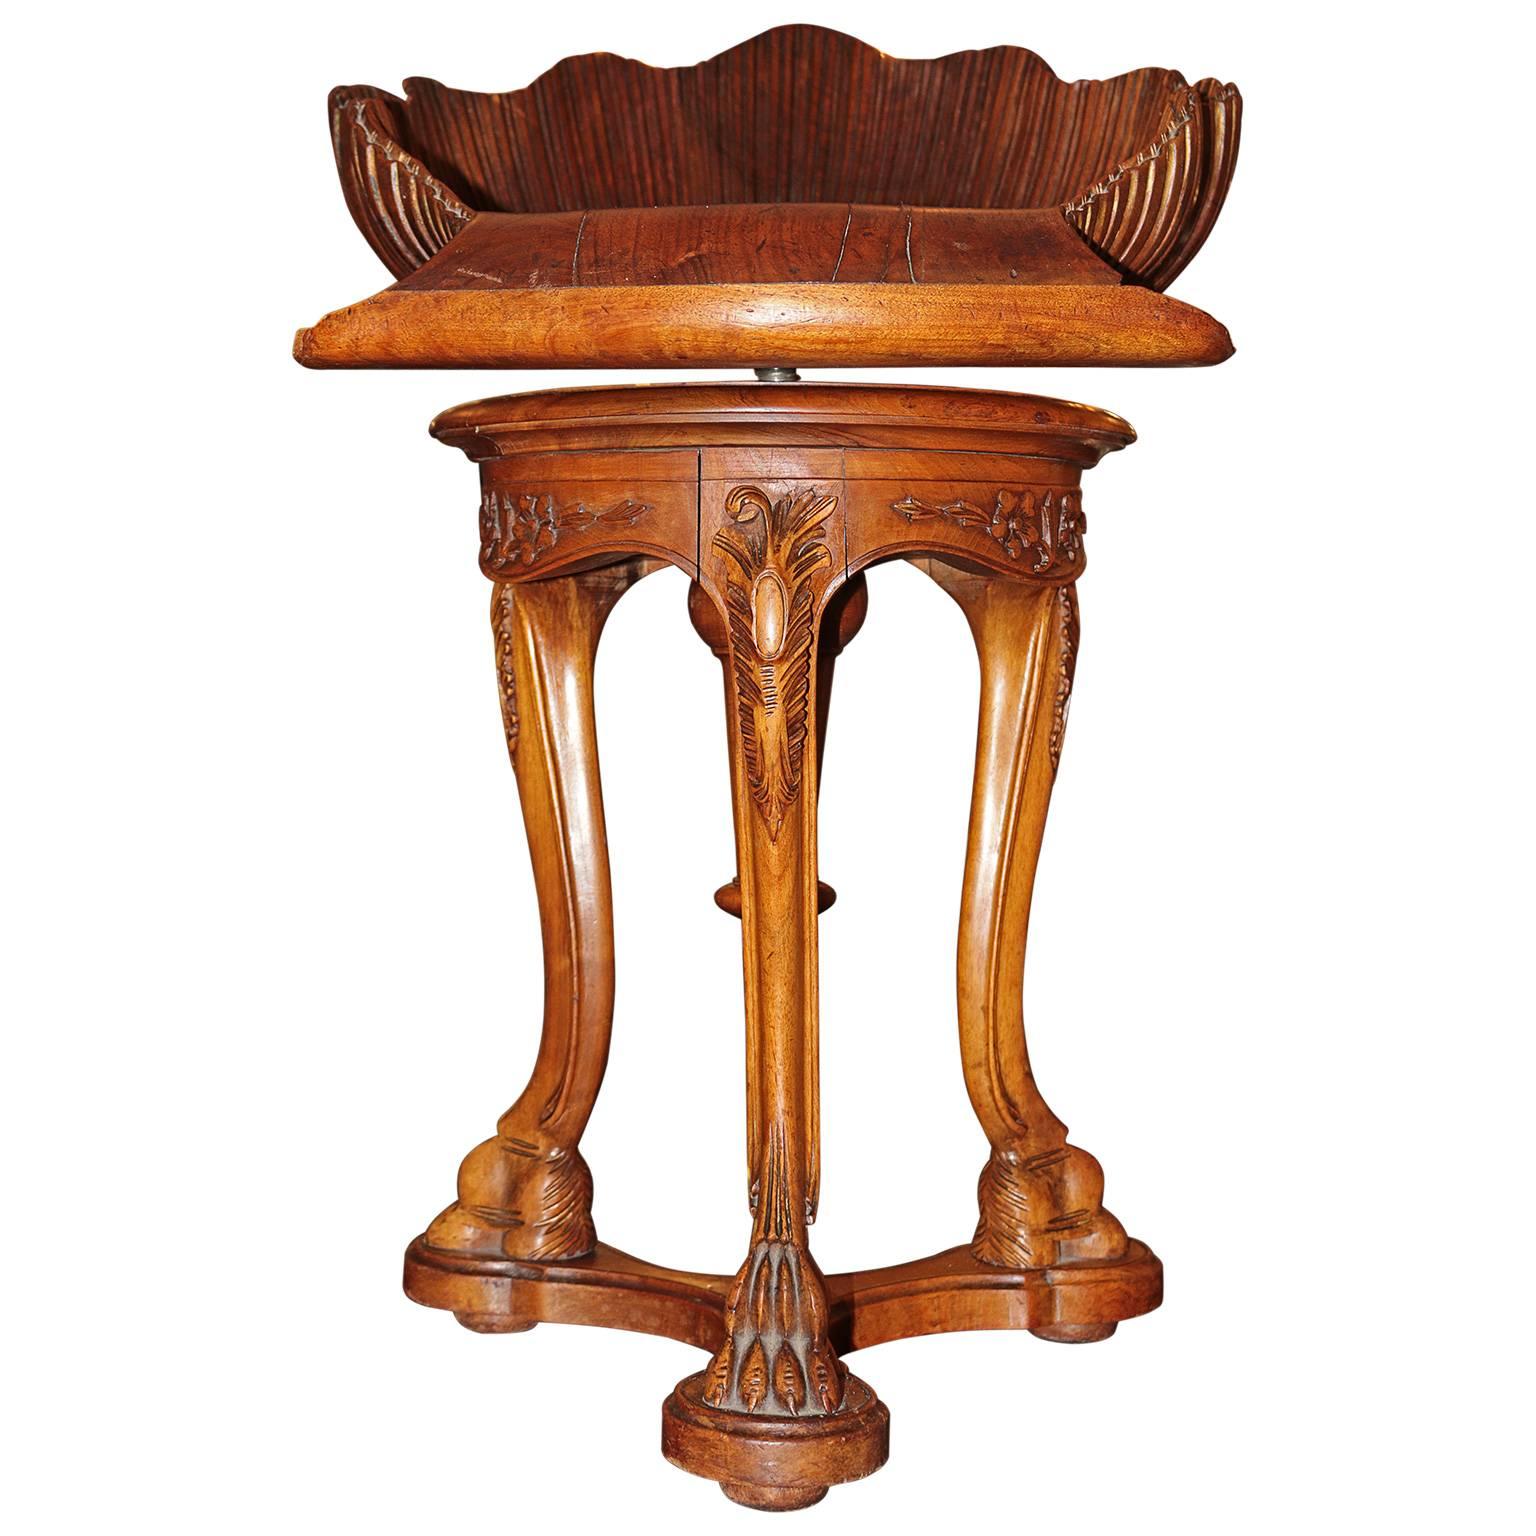 Adjustable early 20th century finely manufactured rocaille shell seat swivel stool has a metal rod connecting the base to the seat with tripod connecting legs. This swivel seat at its lowest height is 19